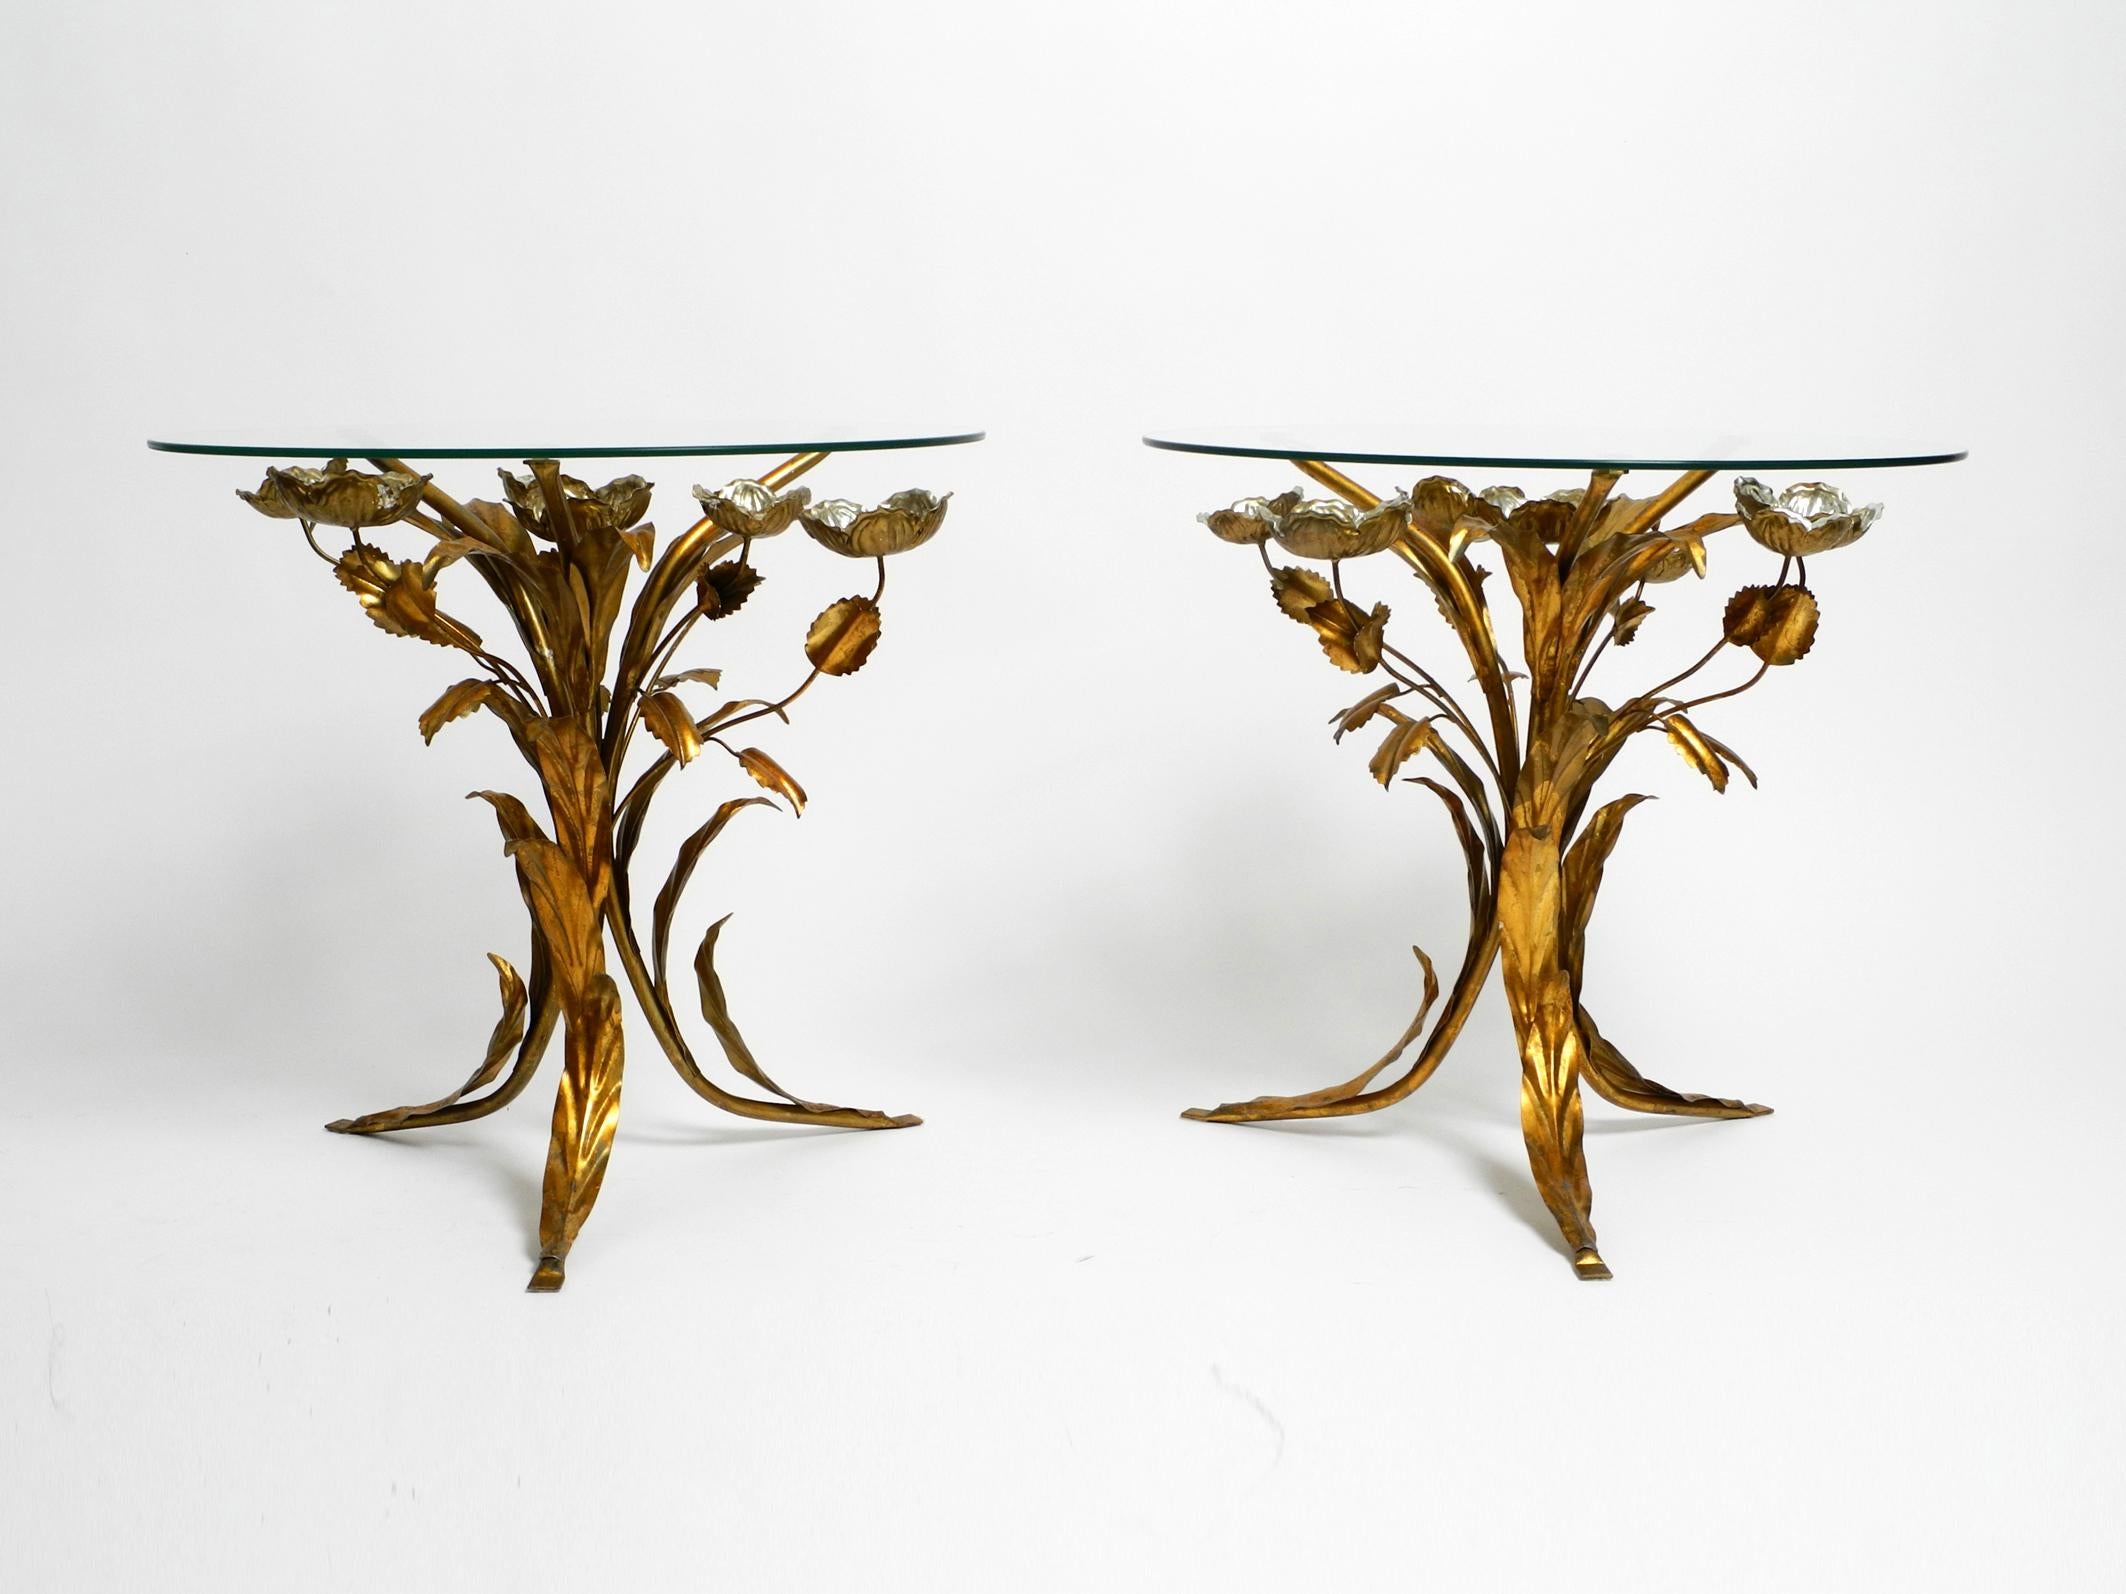 Pair of 1960s rare Florentine side tables or bedside tables.
The frame has three curved legs in the shape of plant leaves with a thick round glass top.
In the middle and outside there are different sized flowers in silver.
Great design with lots of